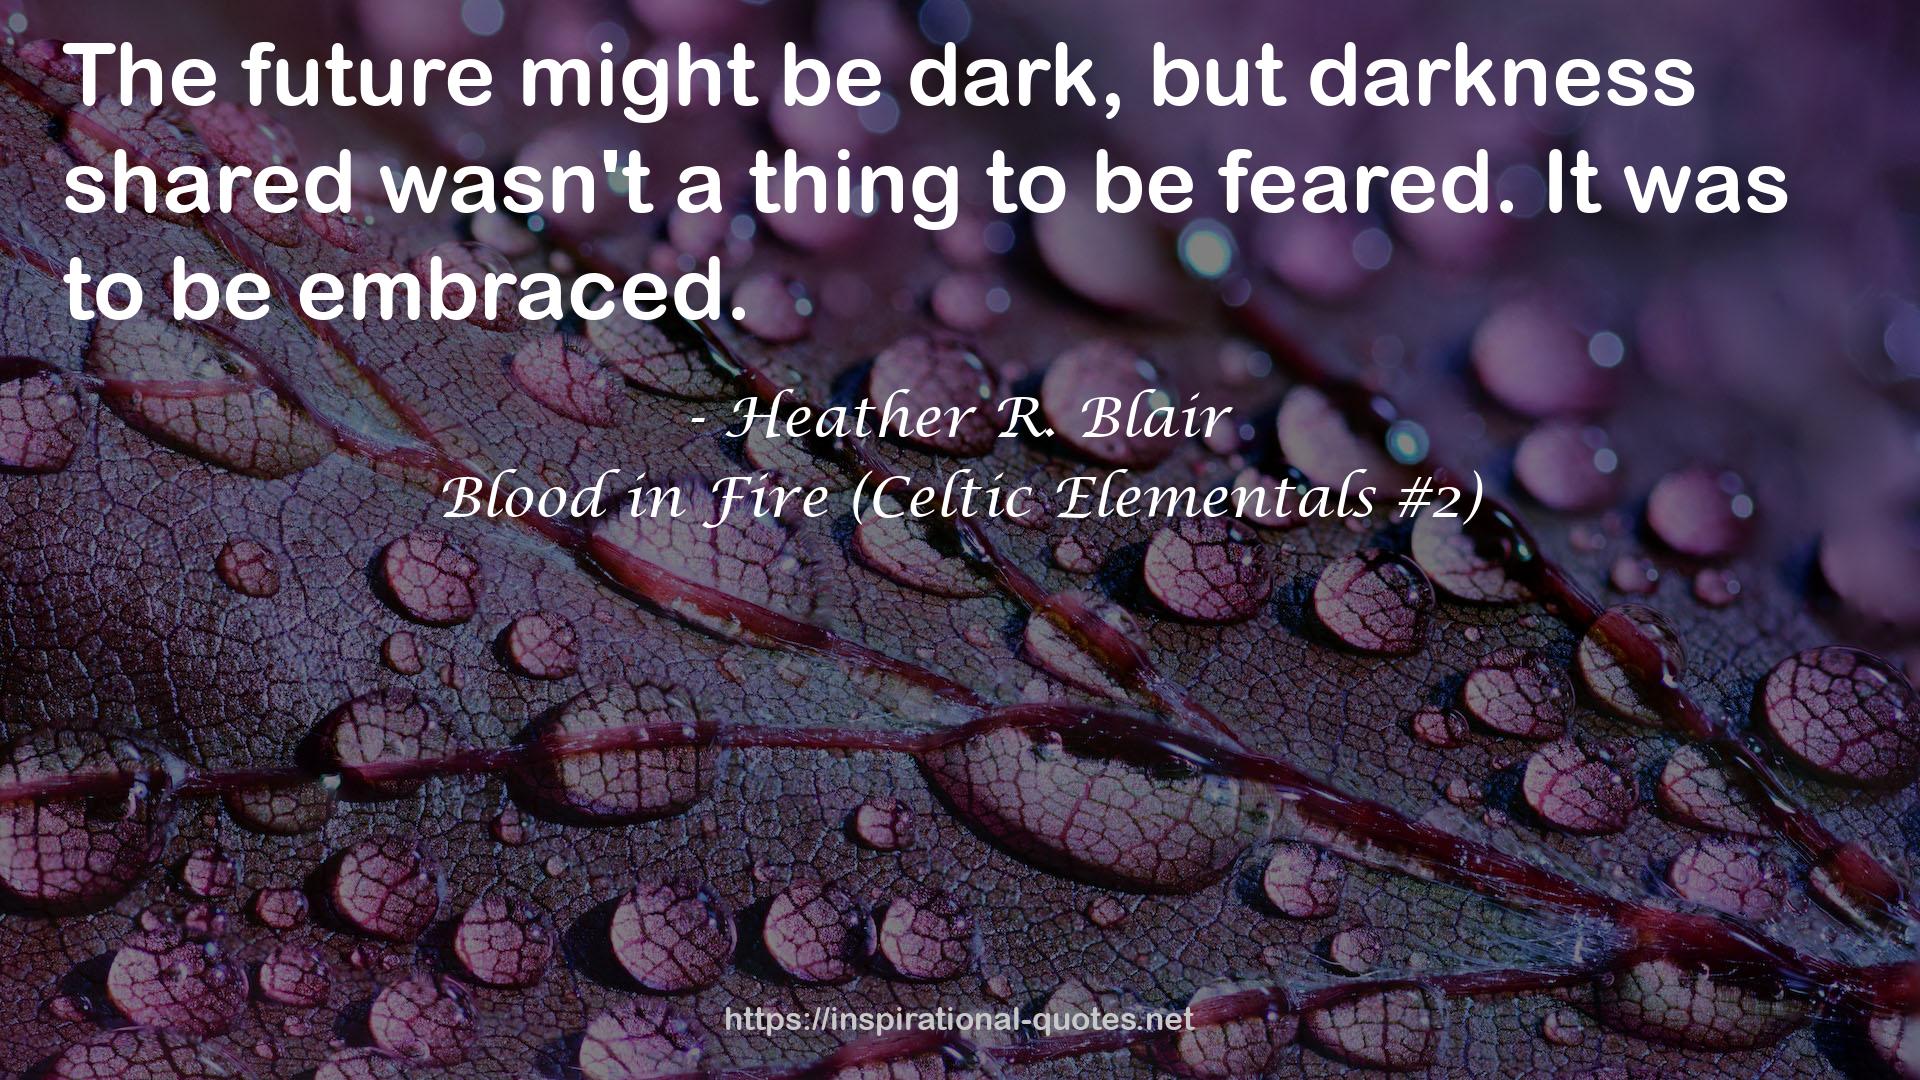 Blood in Fire (Celtic Elementals #2) QUOTES